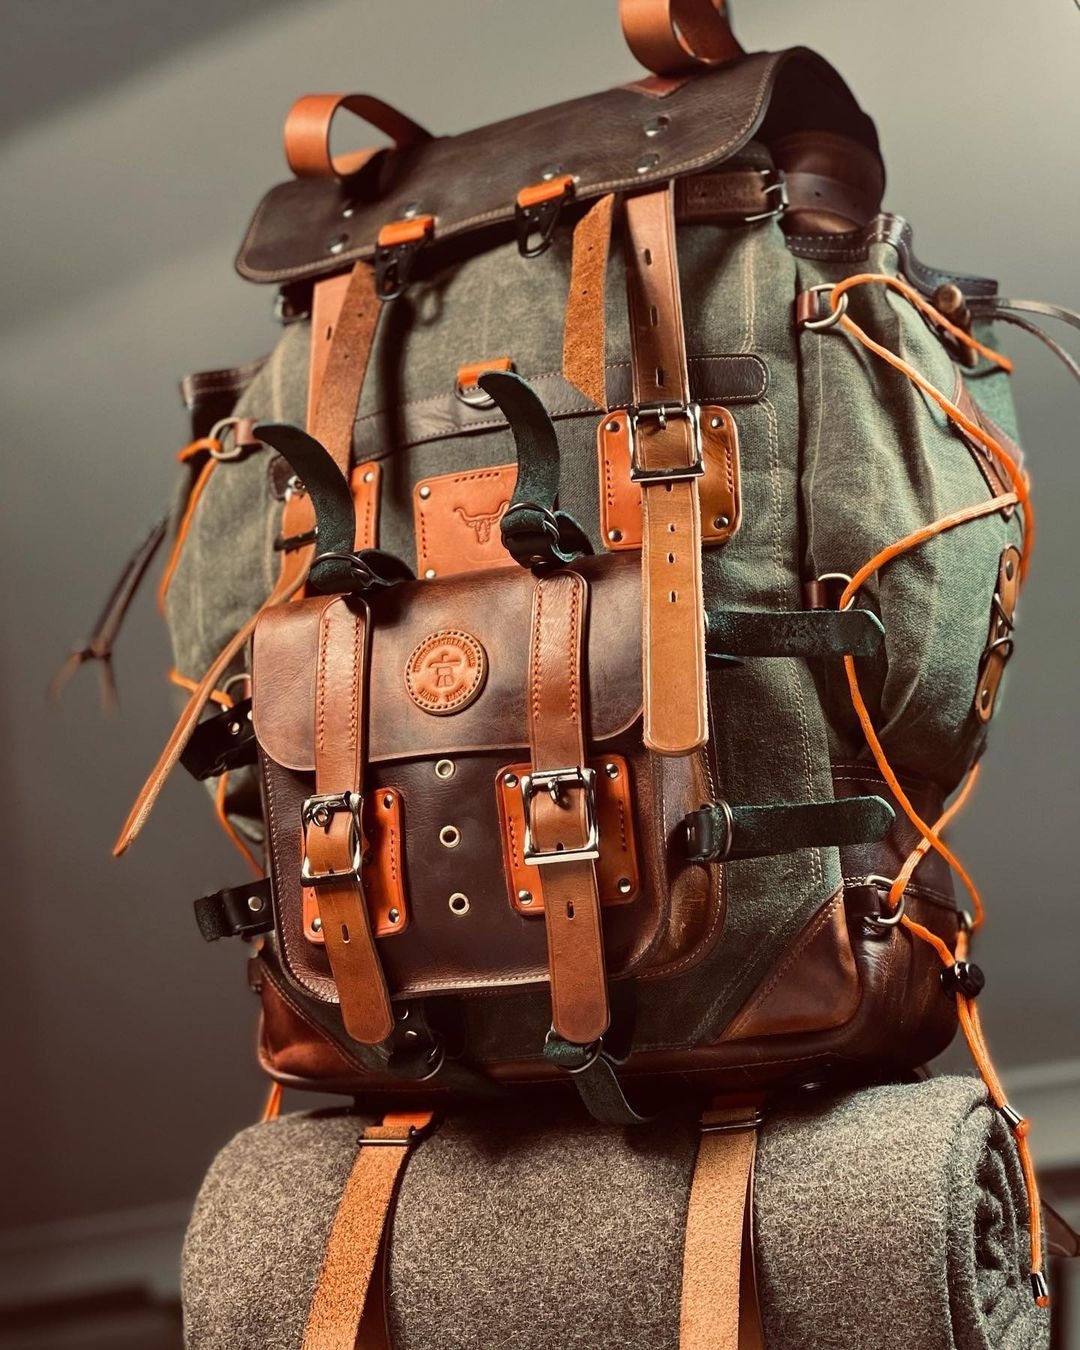 Limited Handmade Waxed Canvas Backpack | 50 L | Leather Backpack | Daily Use | Bushcraft, Travel, Camping, Hunting, Fishing, Sports bag bushcraft - camping - hiking backpack 99percenthandmade   